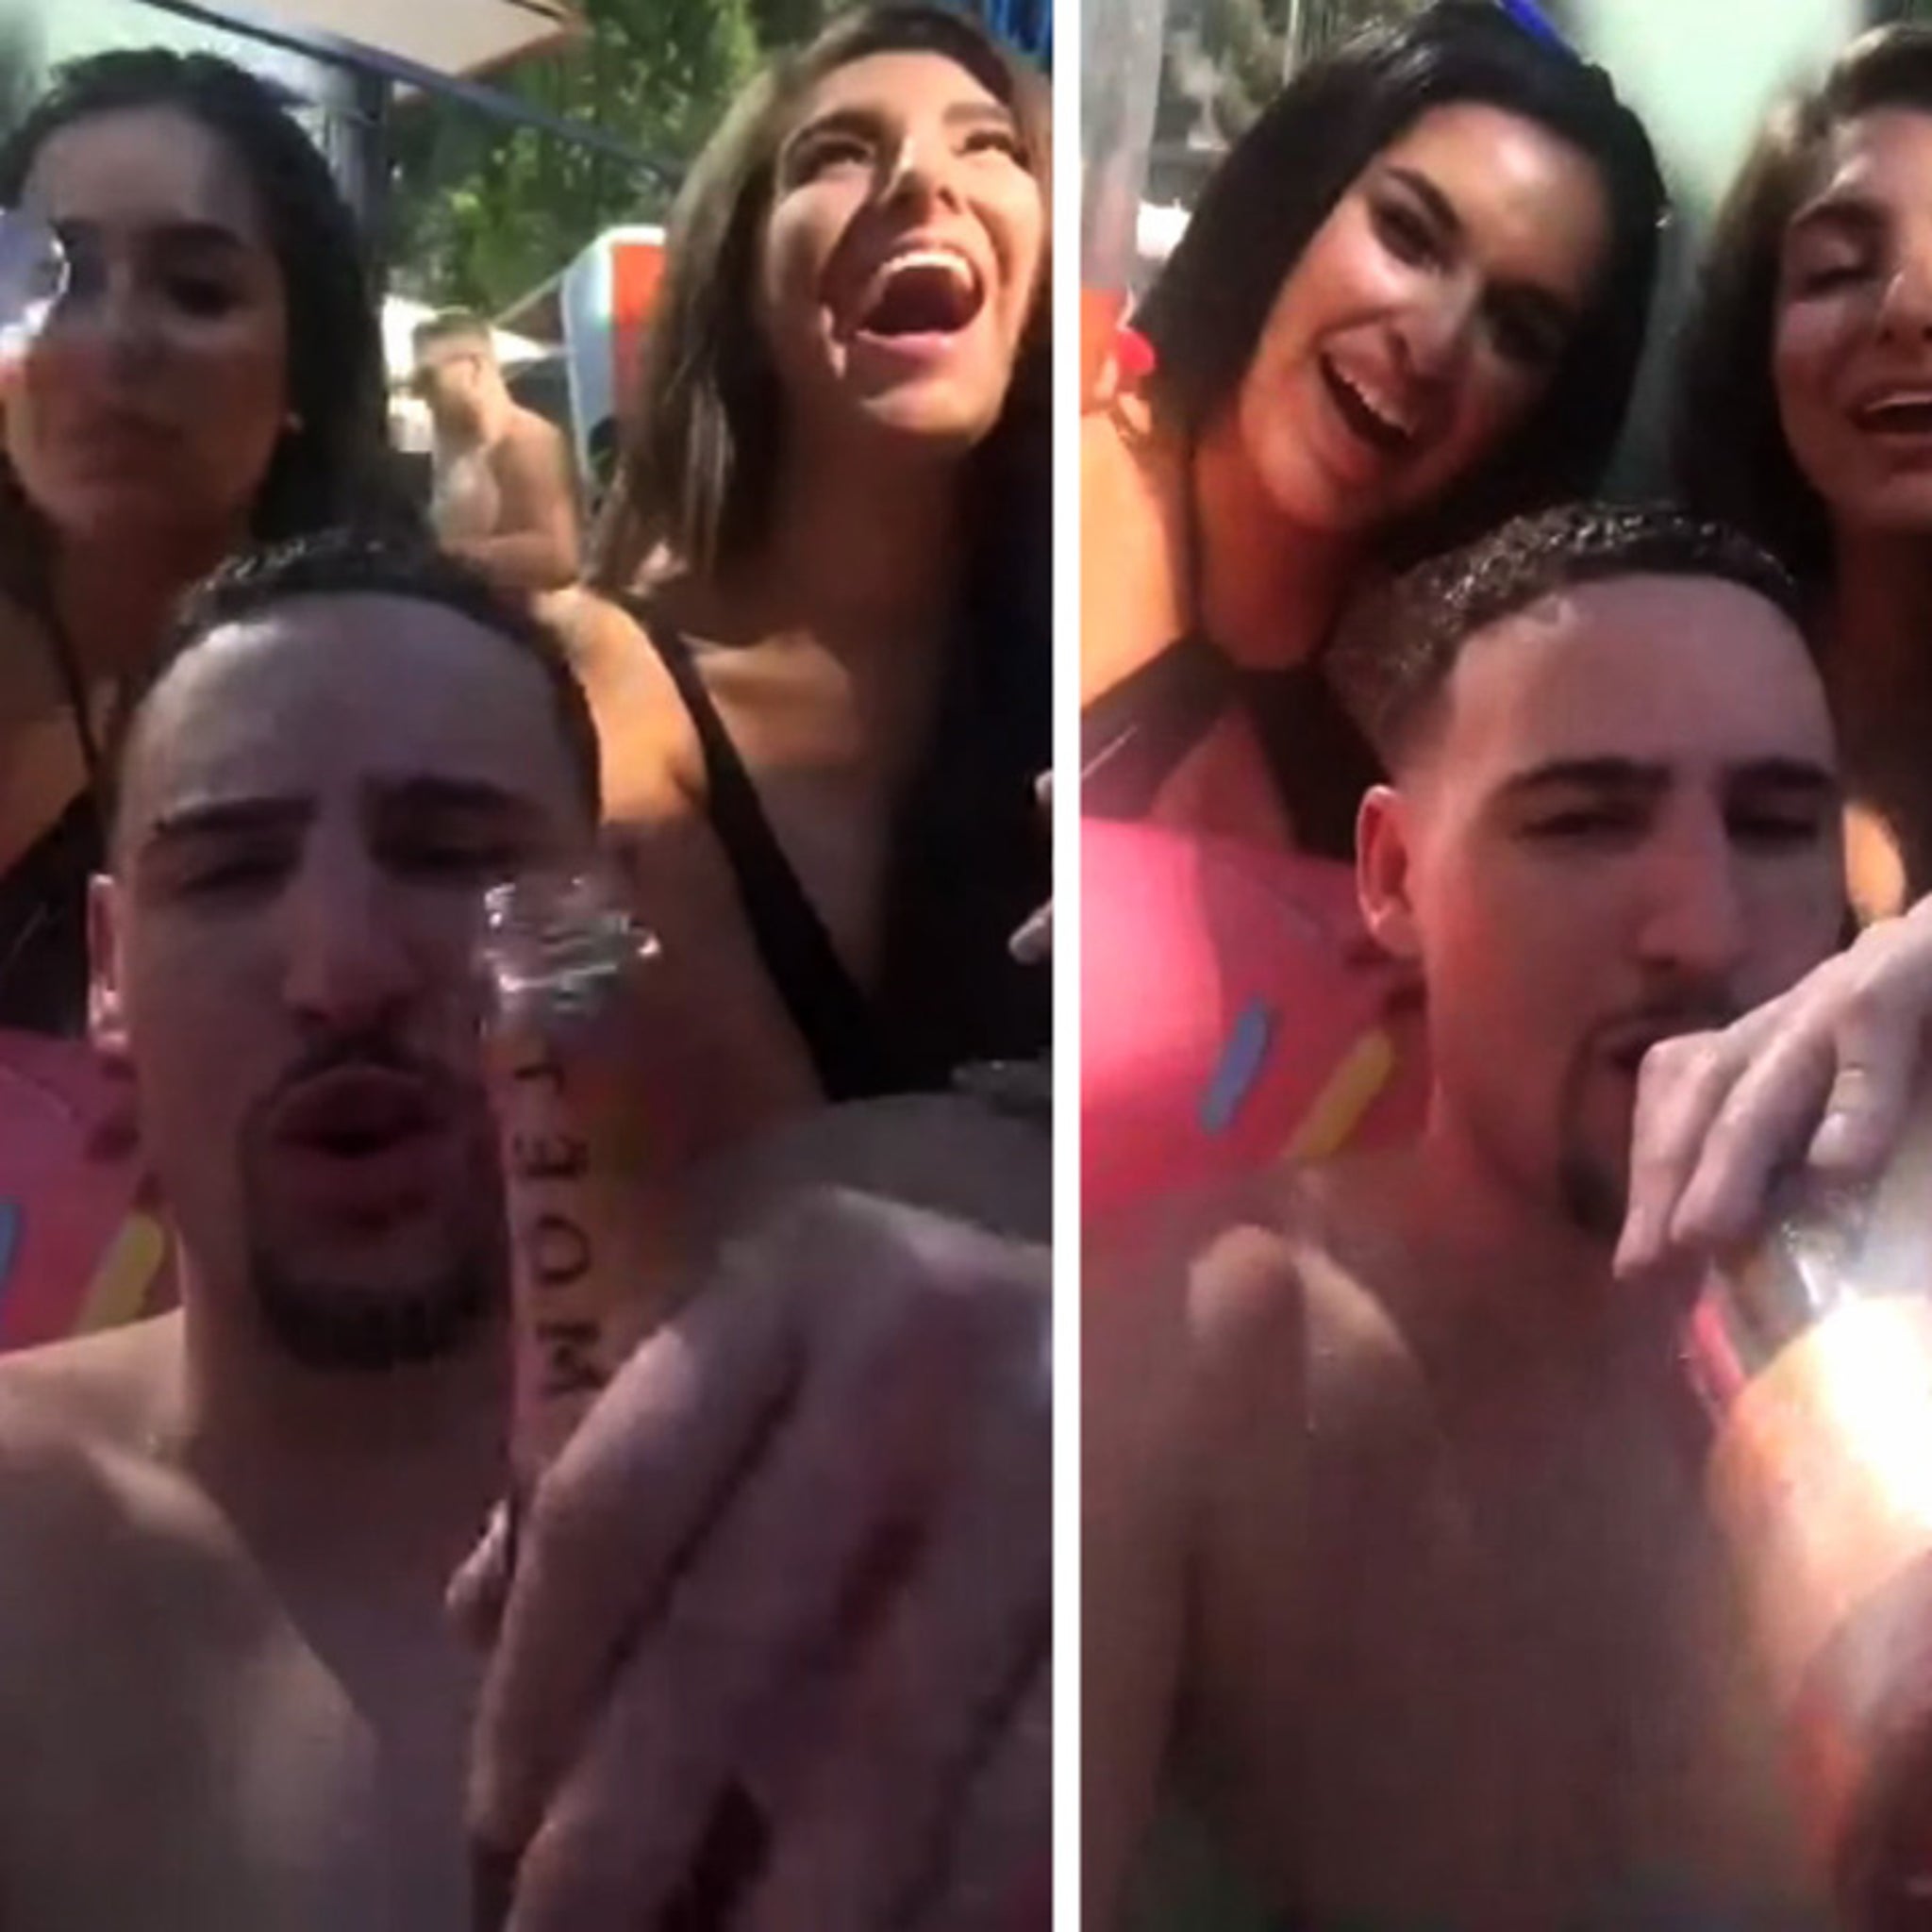 HOT COUGAR ACTION: Klay Thompson Wraps Up His Rookie Season - CougCenter